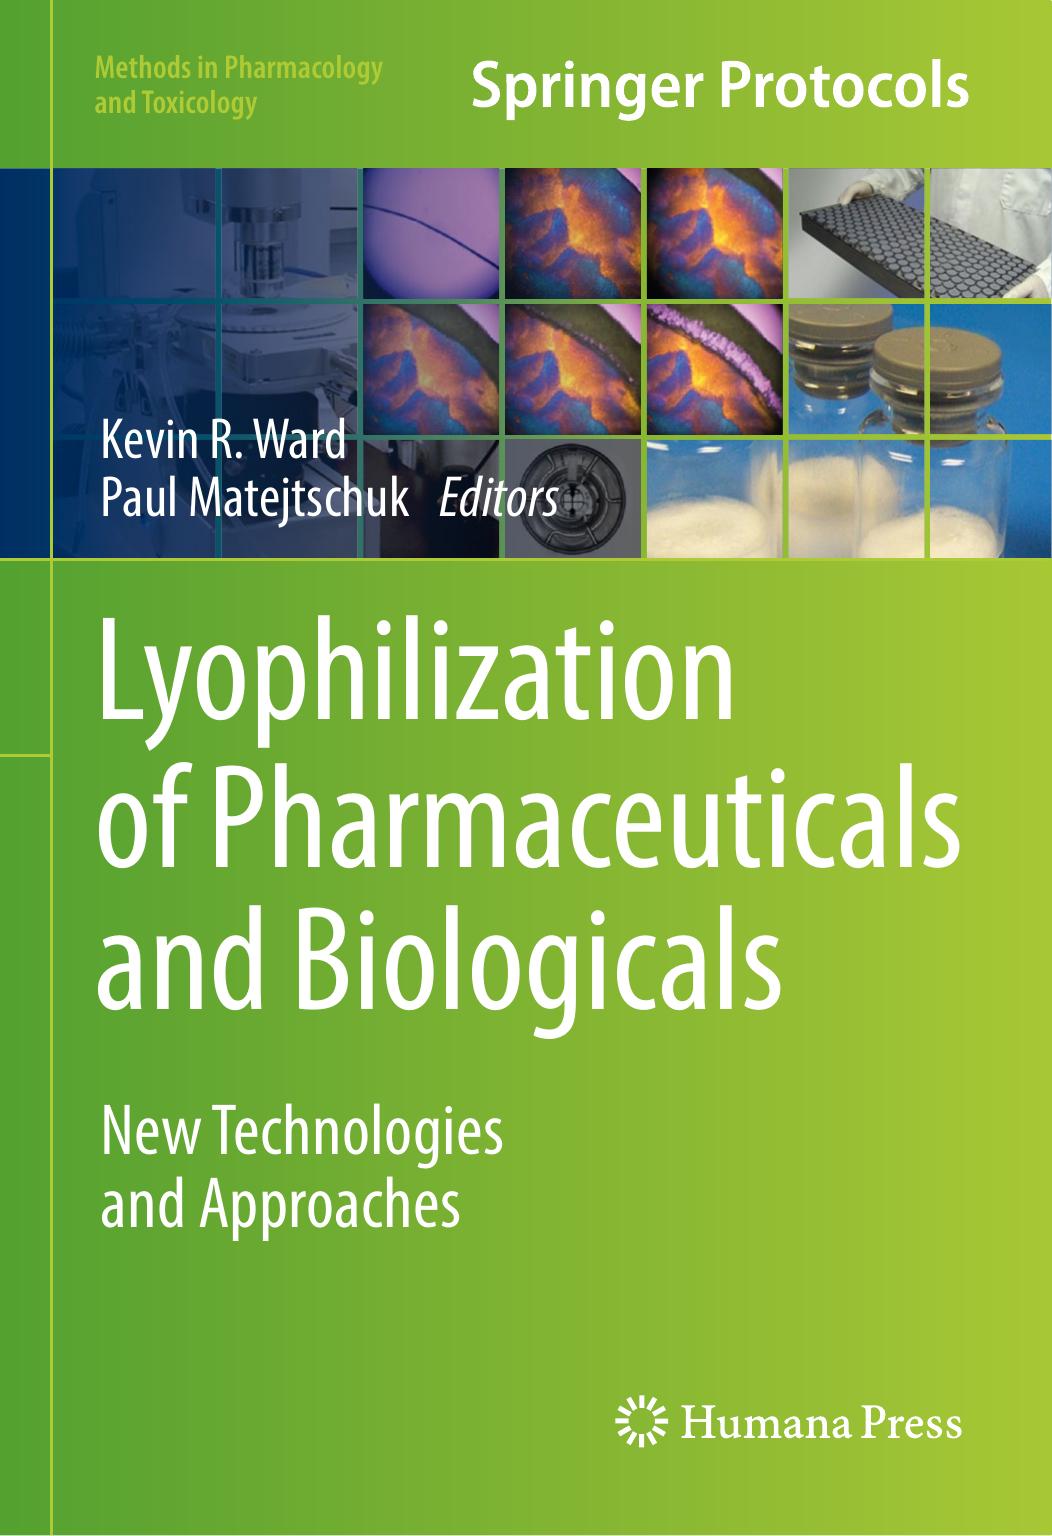 Lyophilization of Pharmaceuticals and Biologicals New Technologies, 2019